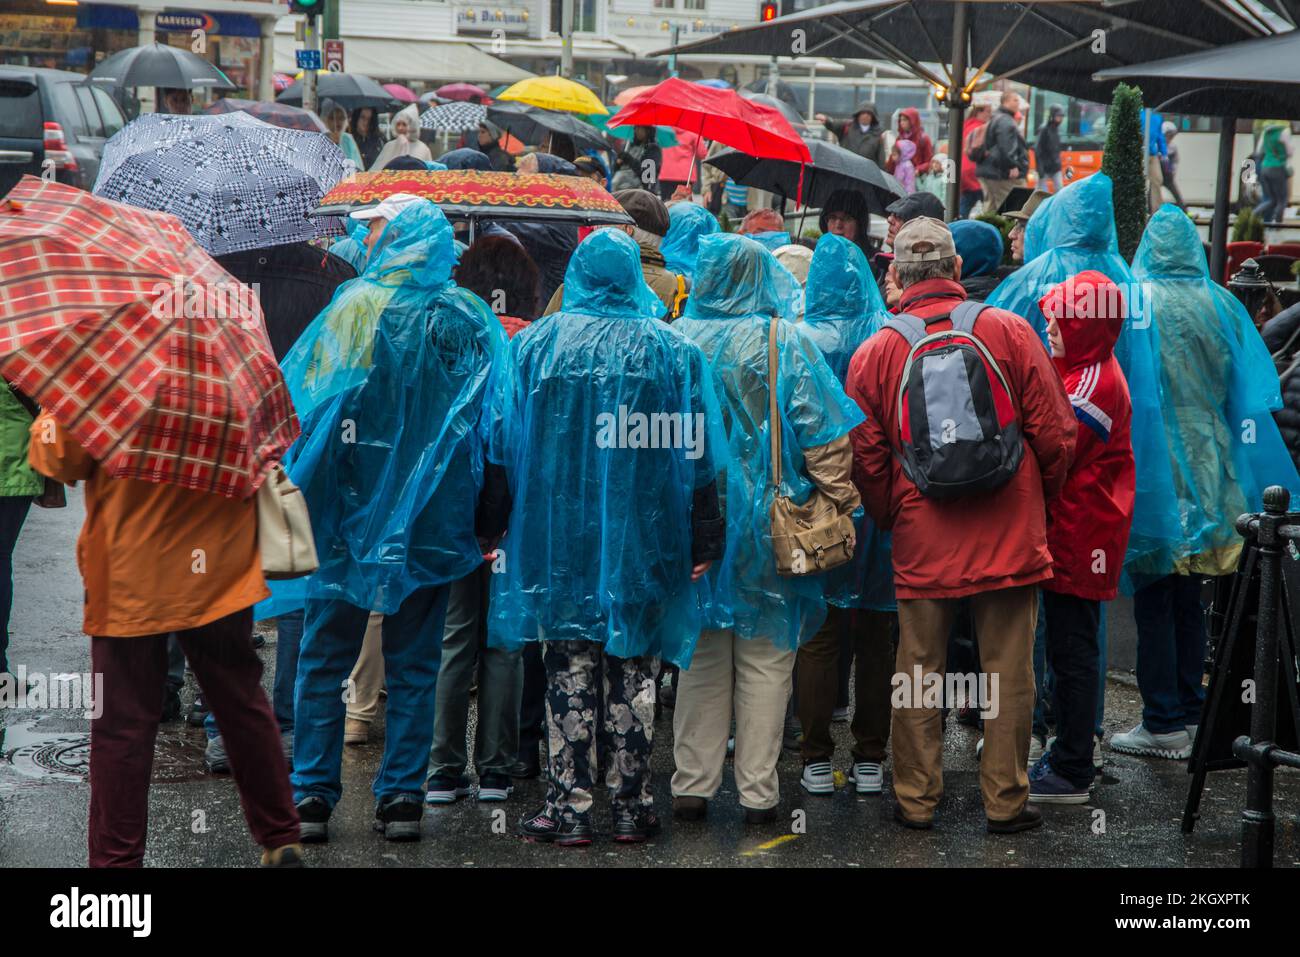 People in the rain with umbrellas, raincoats and blue ponchos, in the town of Bergen, Norway Stock Photo